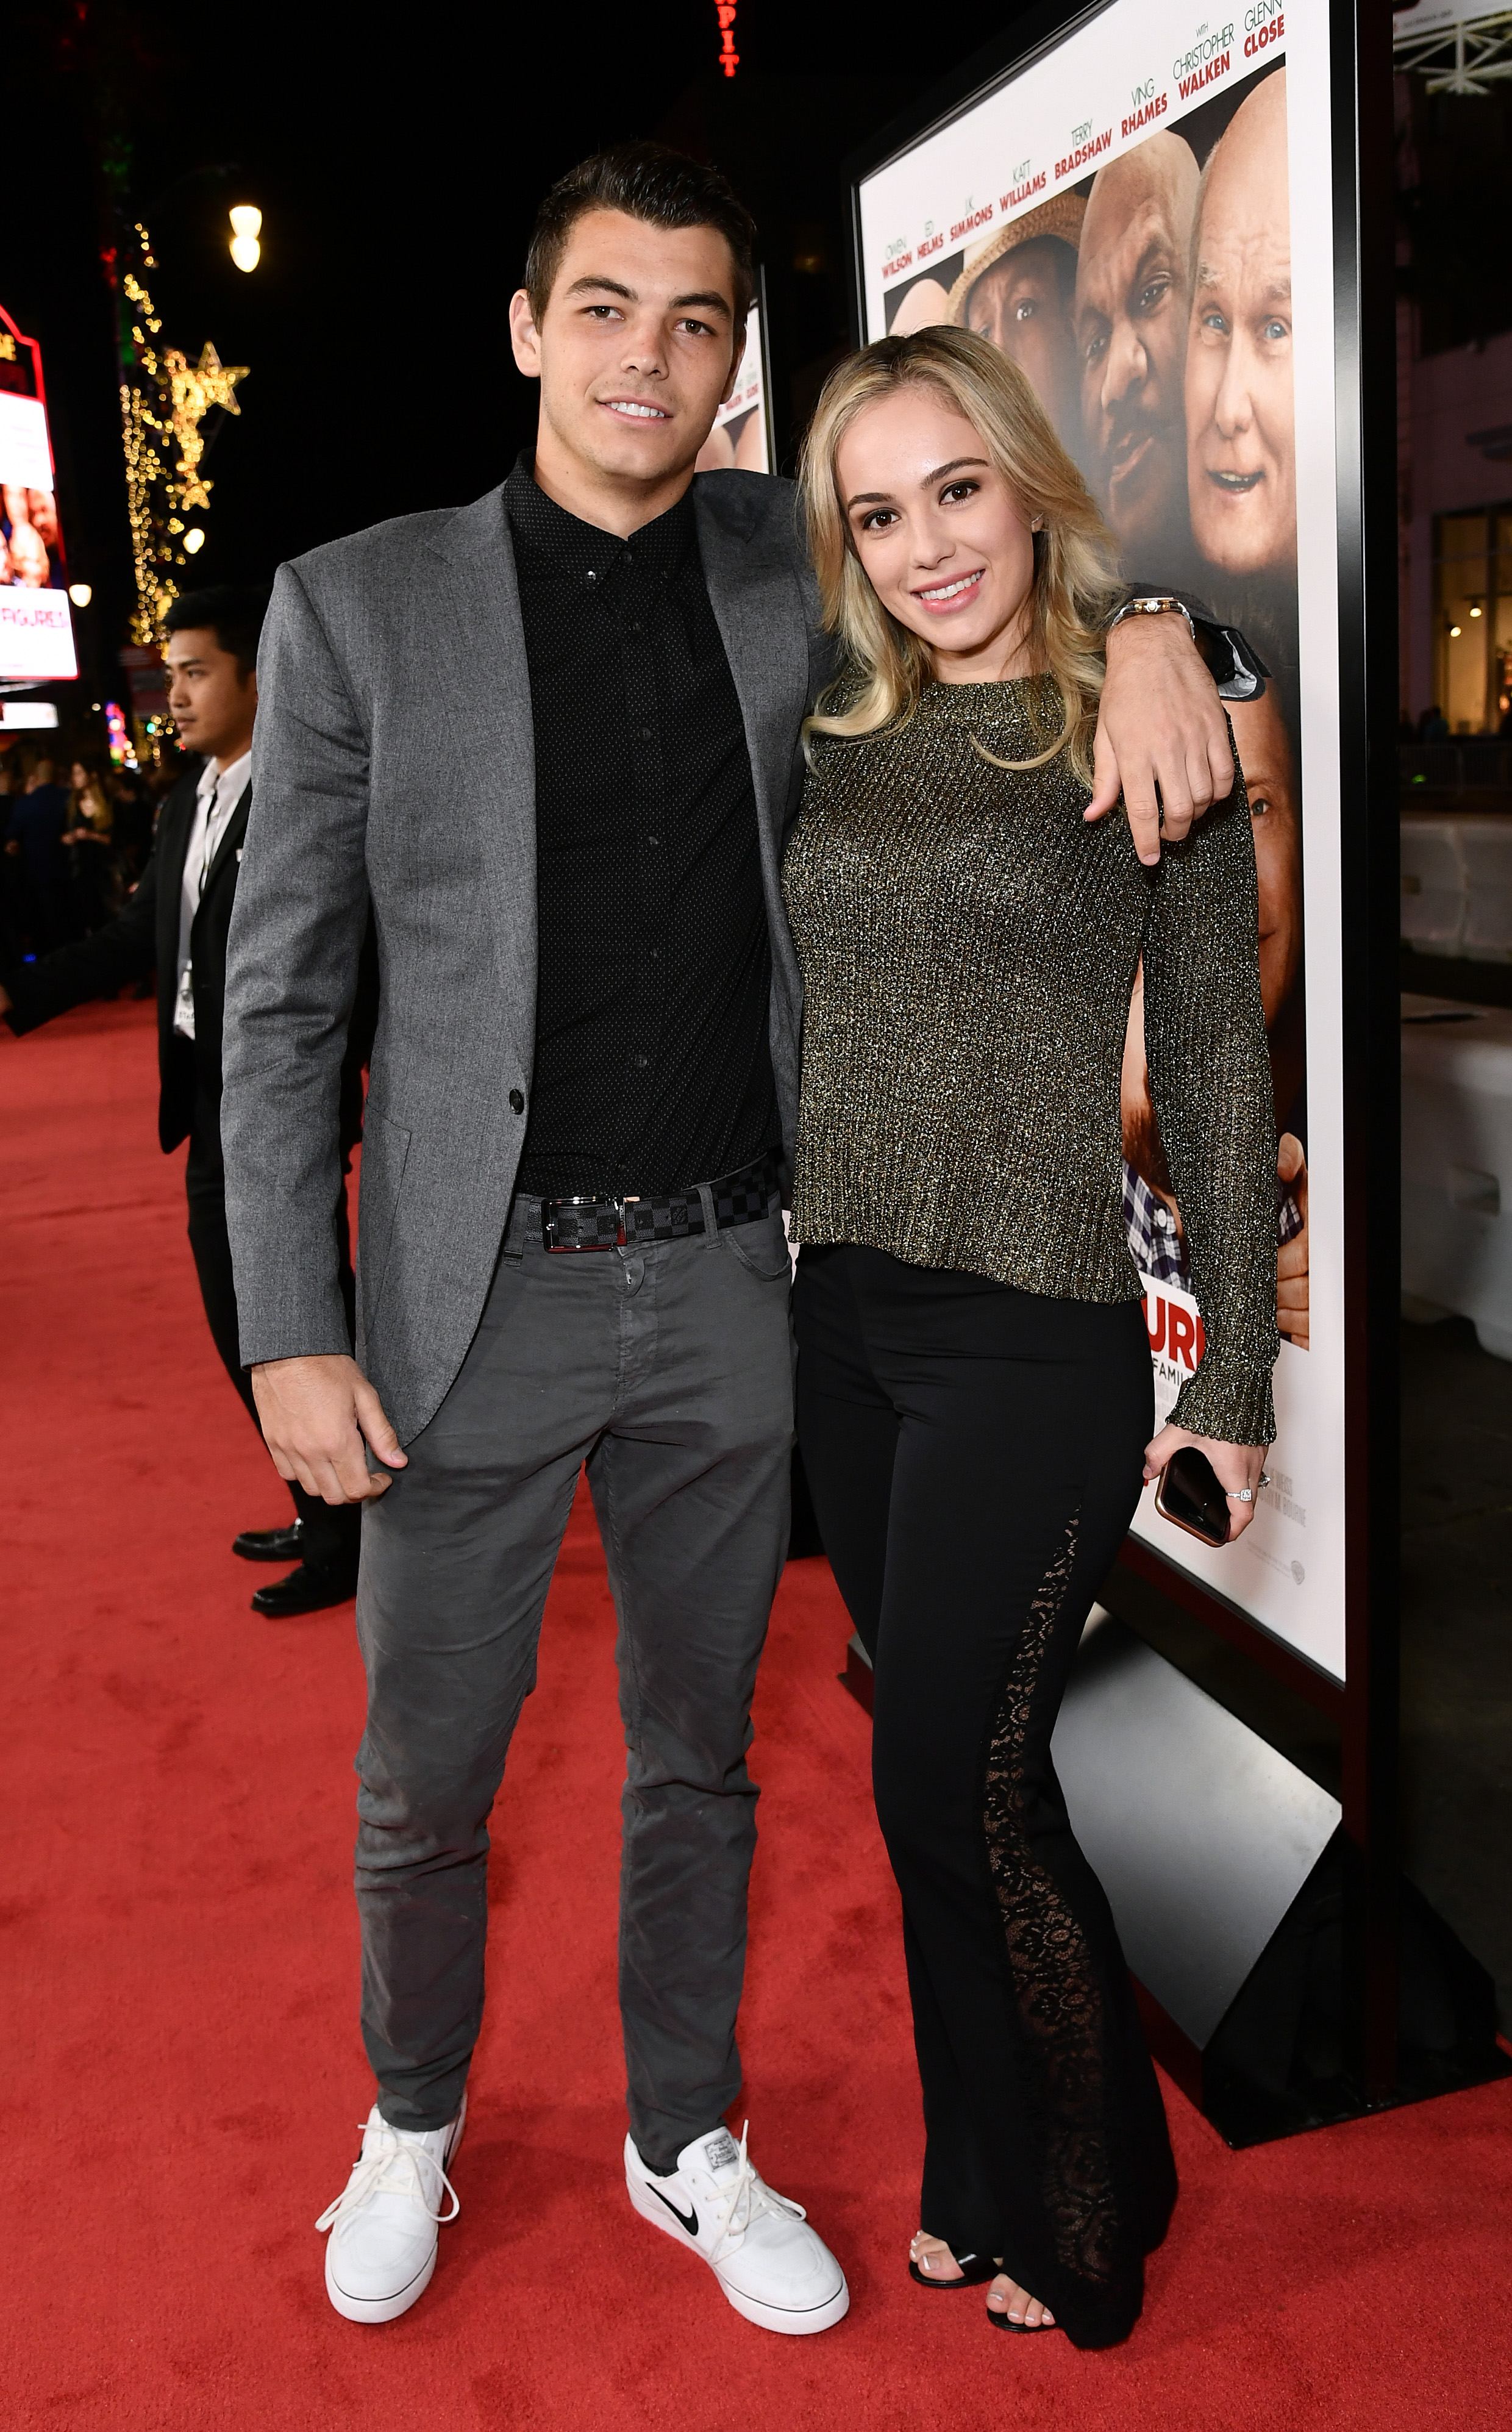 Taylor Fritz and Raquel Pedraza at the "Father Figures" premiere on December 13, 2017, in Los Angeles, California. | Source: Getty Images